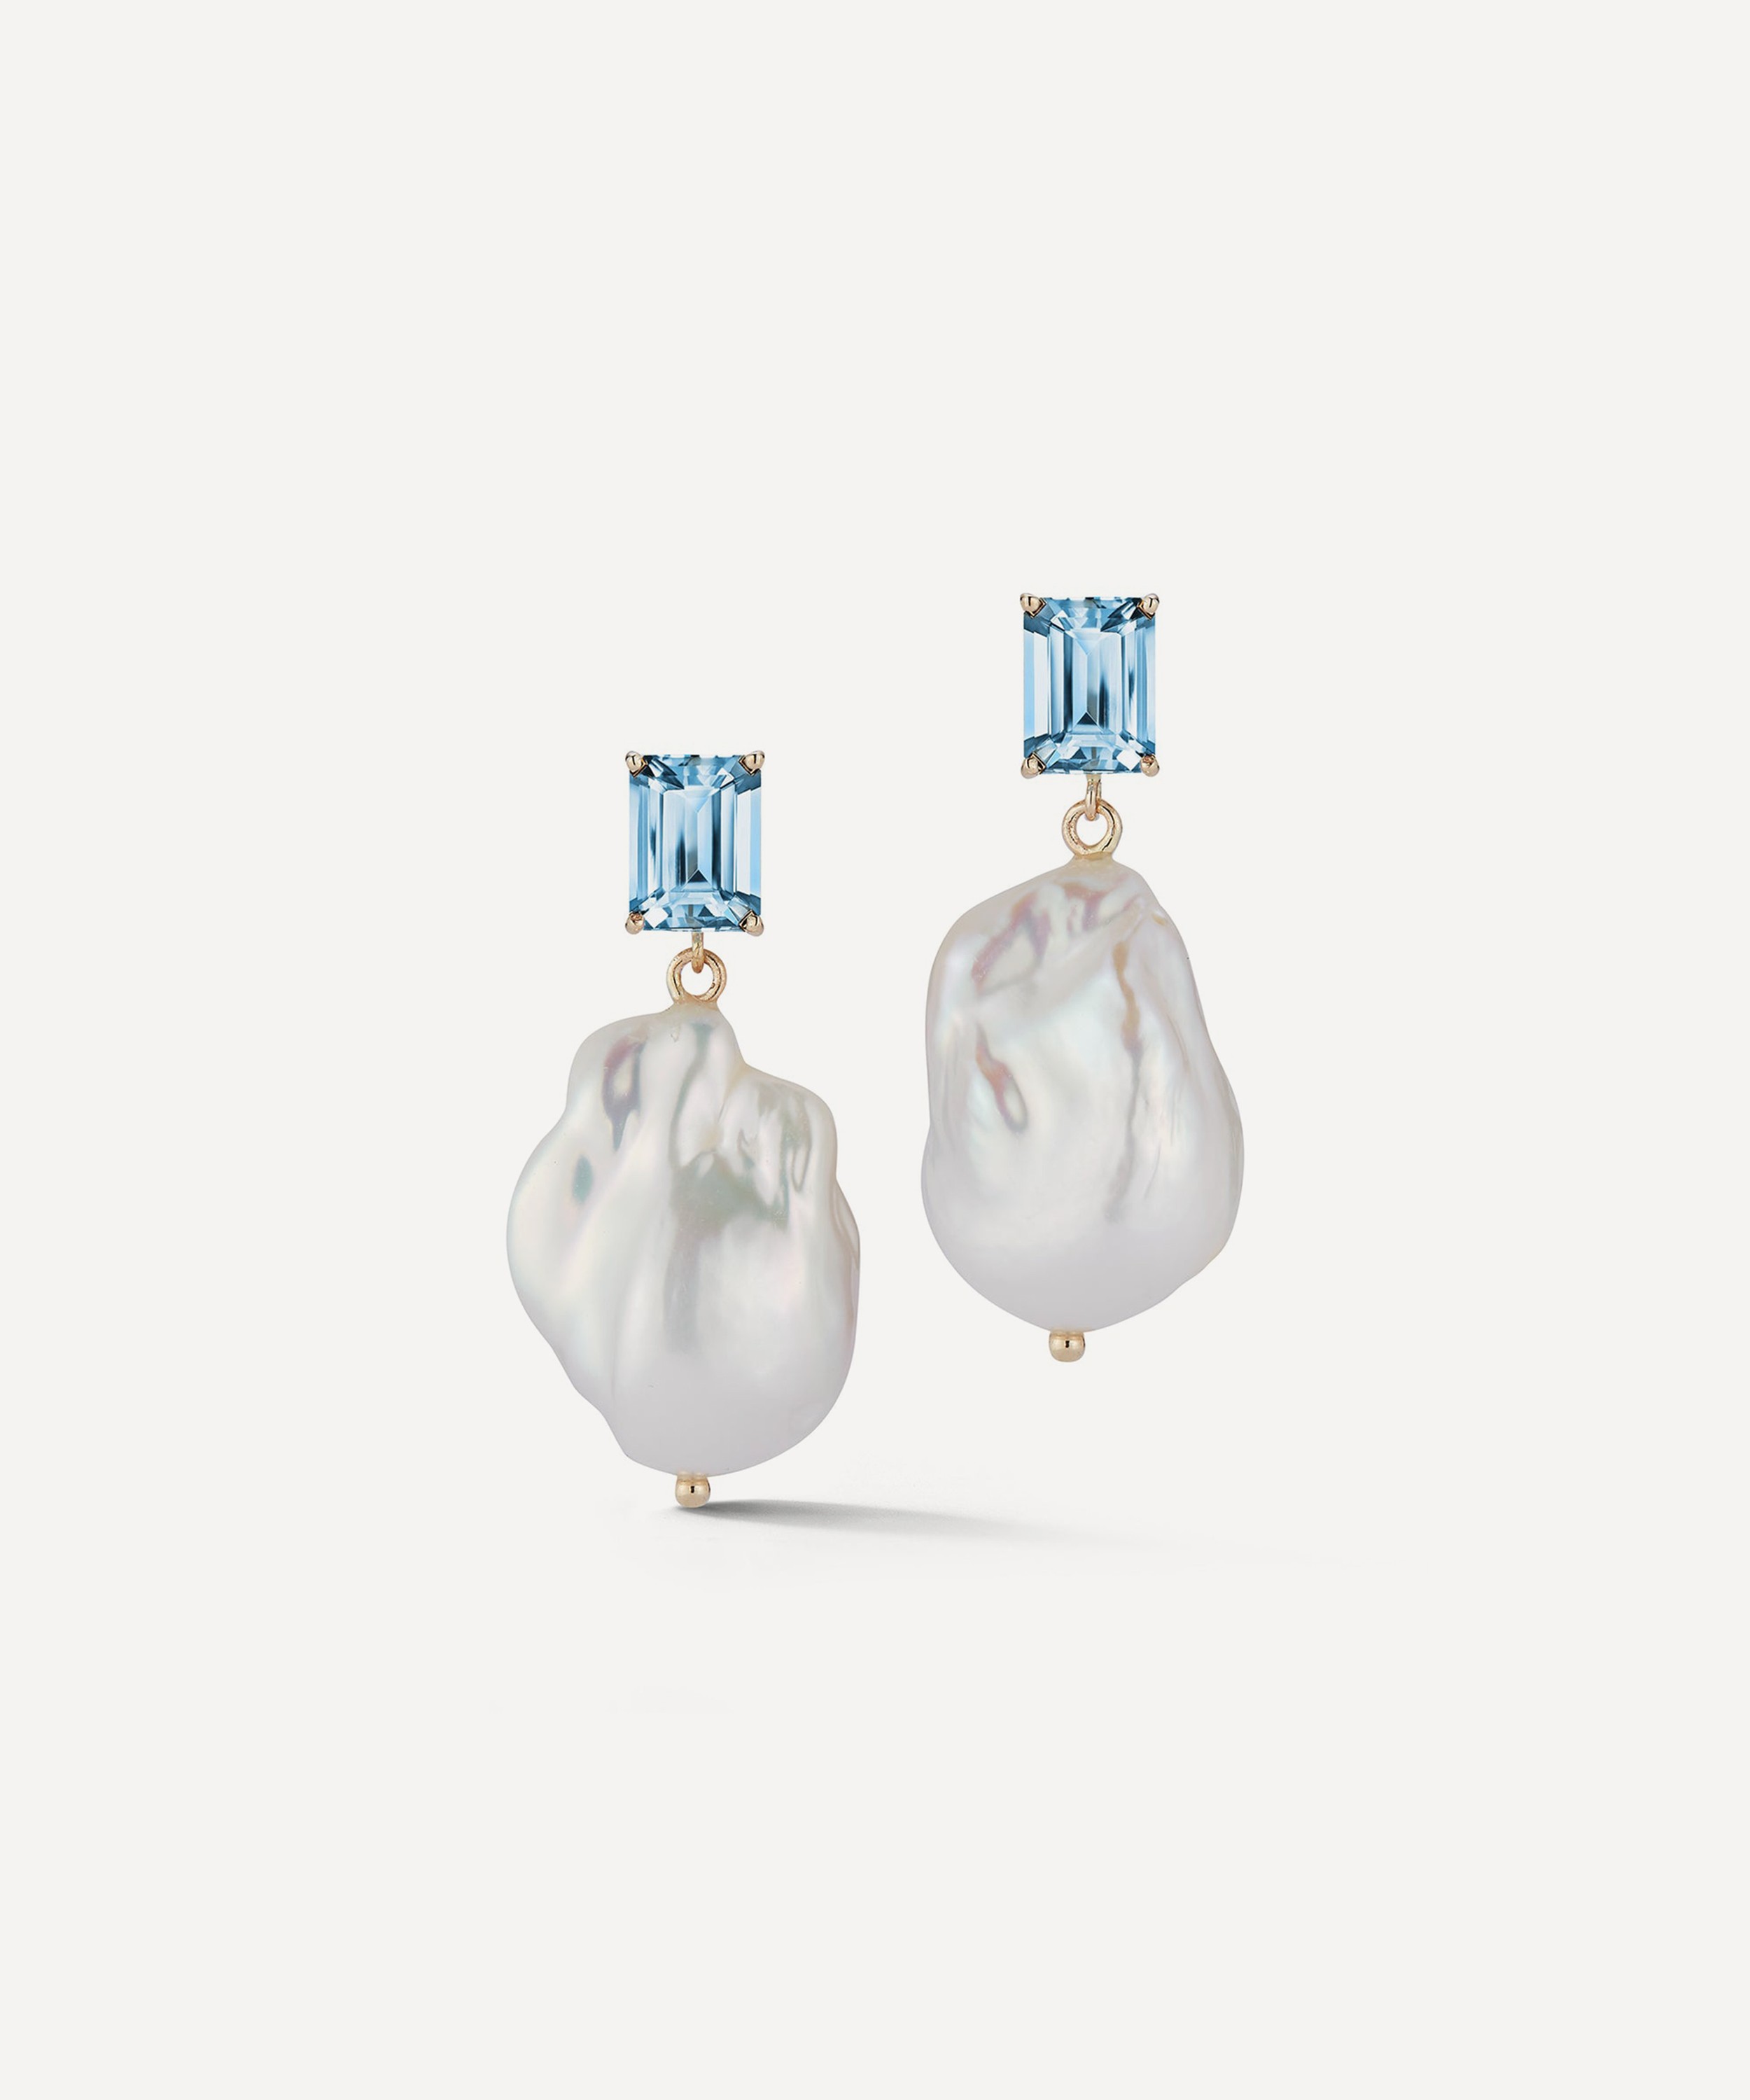 Mateo - 14ct Gold Blue Topaz and Baroque Pearl Drop Earrings